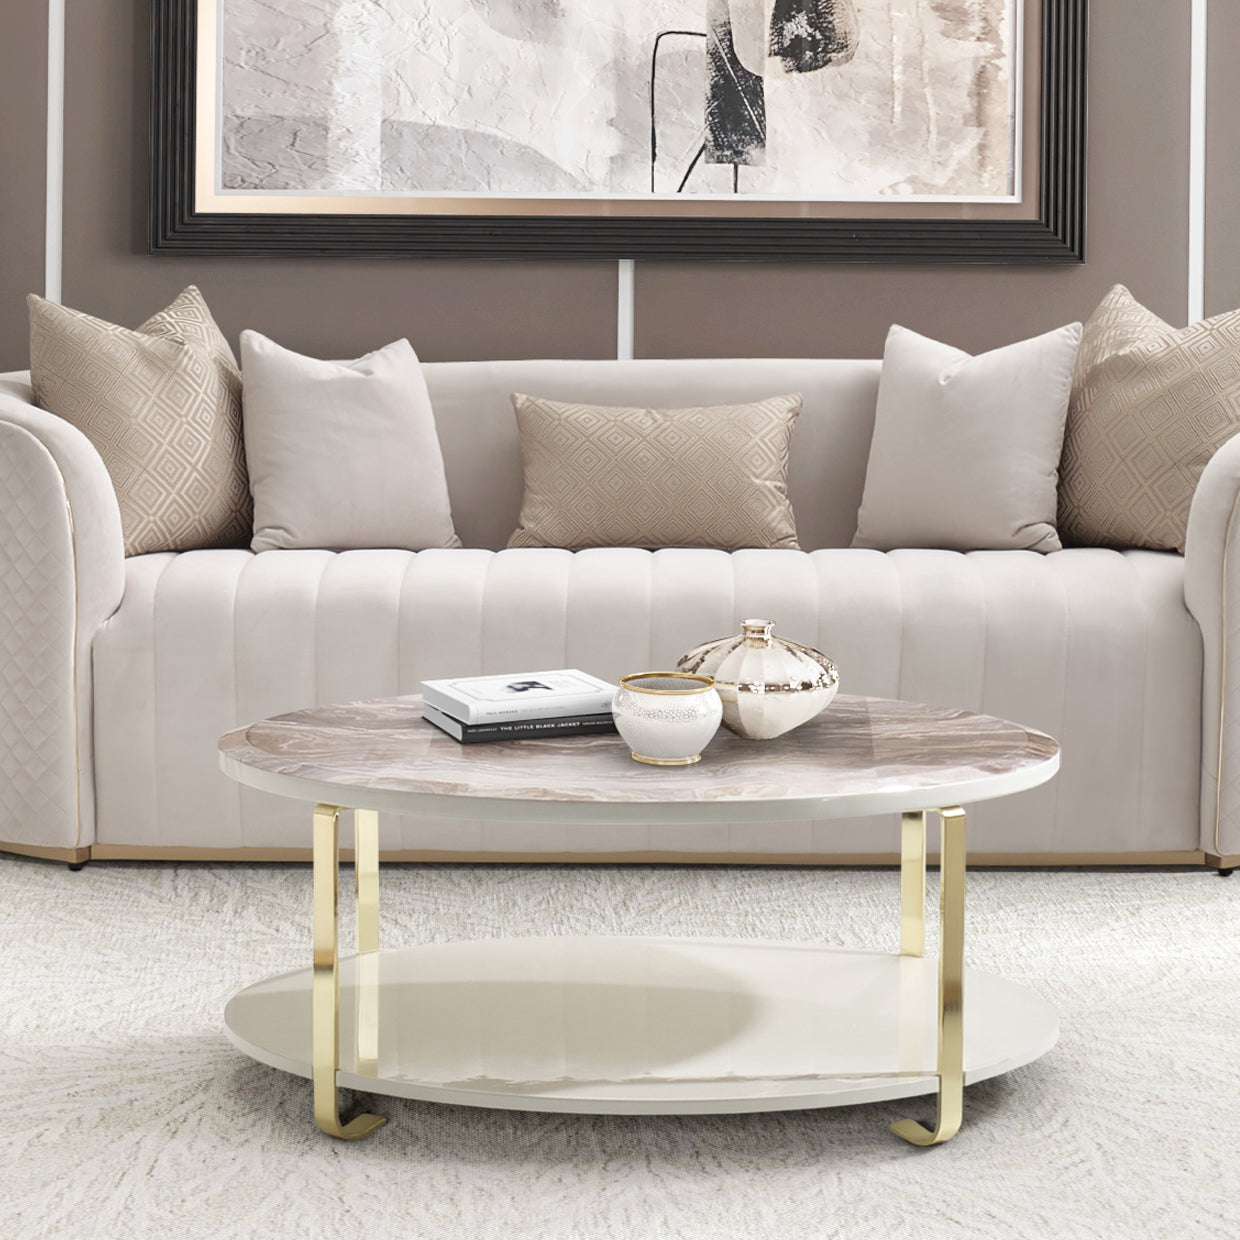 Ariana Cocktail Table, living room, faux marble top, slender golden legs, sheer elegance, functional lower shelf, storing select items, impress, guests, glamorous centerpiece, moment's notice, dream art, michael amini